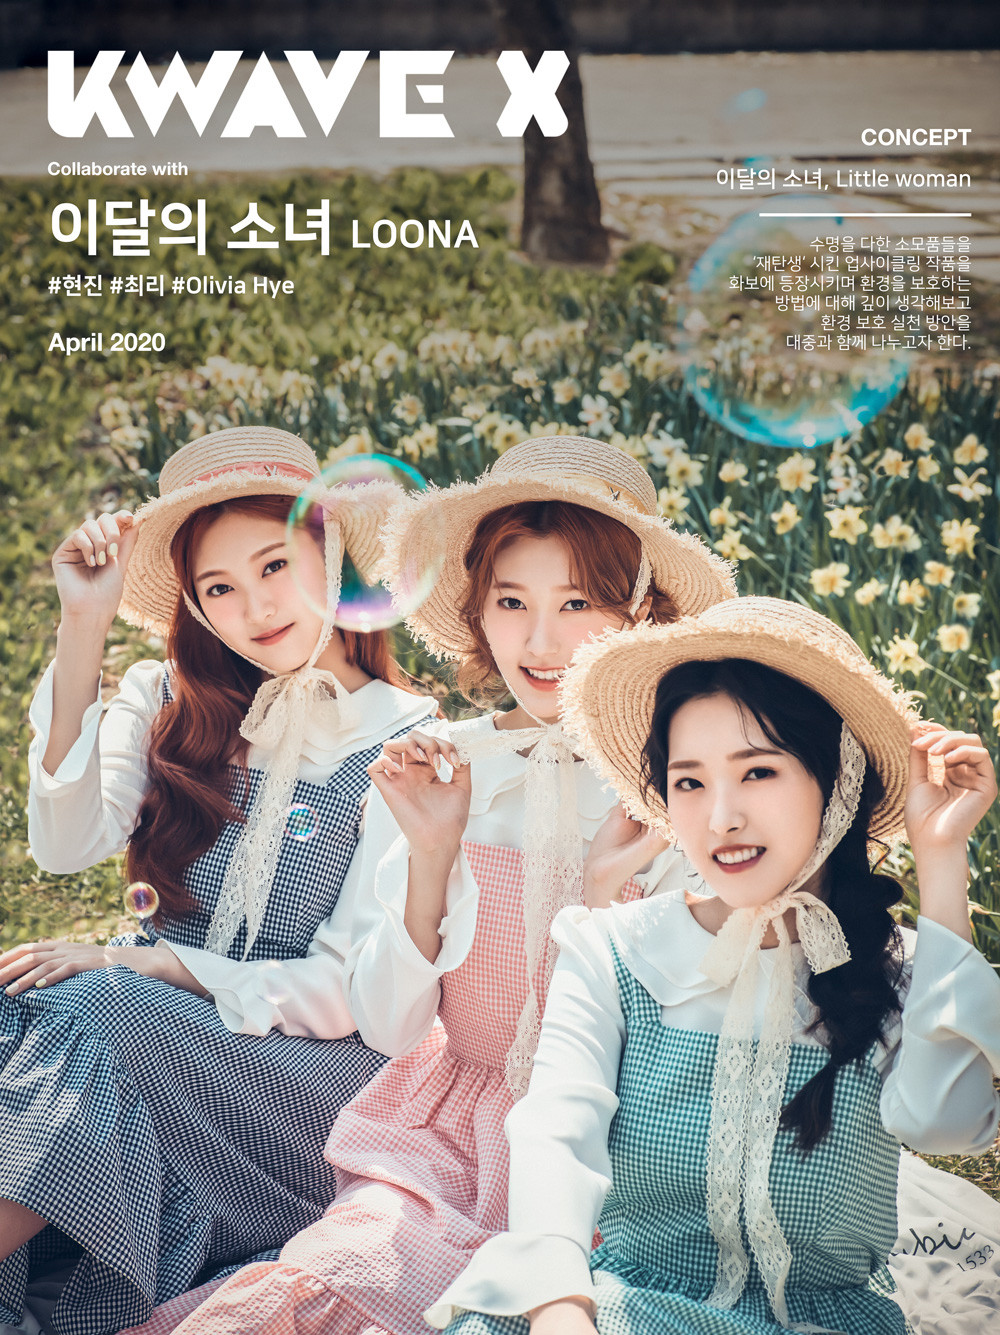 loona-hyunjin-choerry-olivia-hye-are-classic-on-little-women-for-kwave-x-pictorial-4